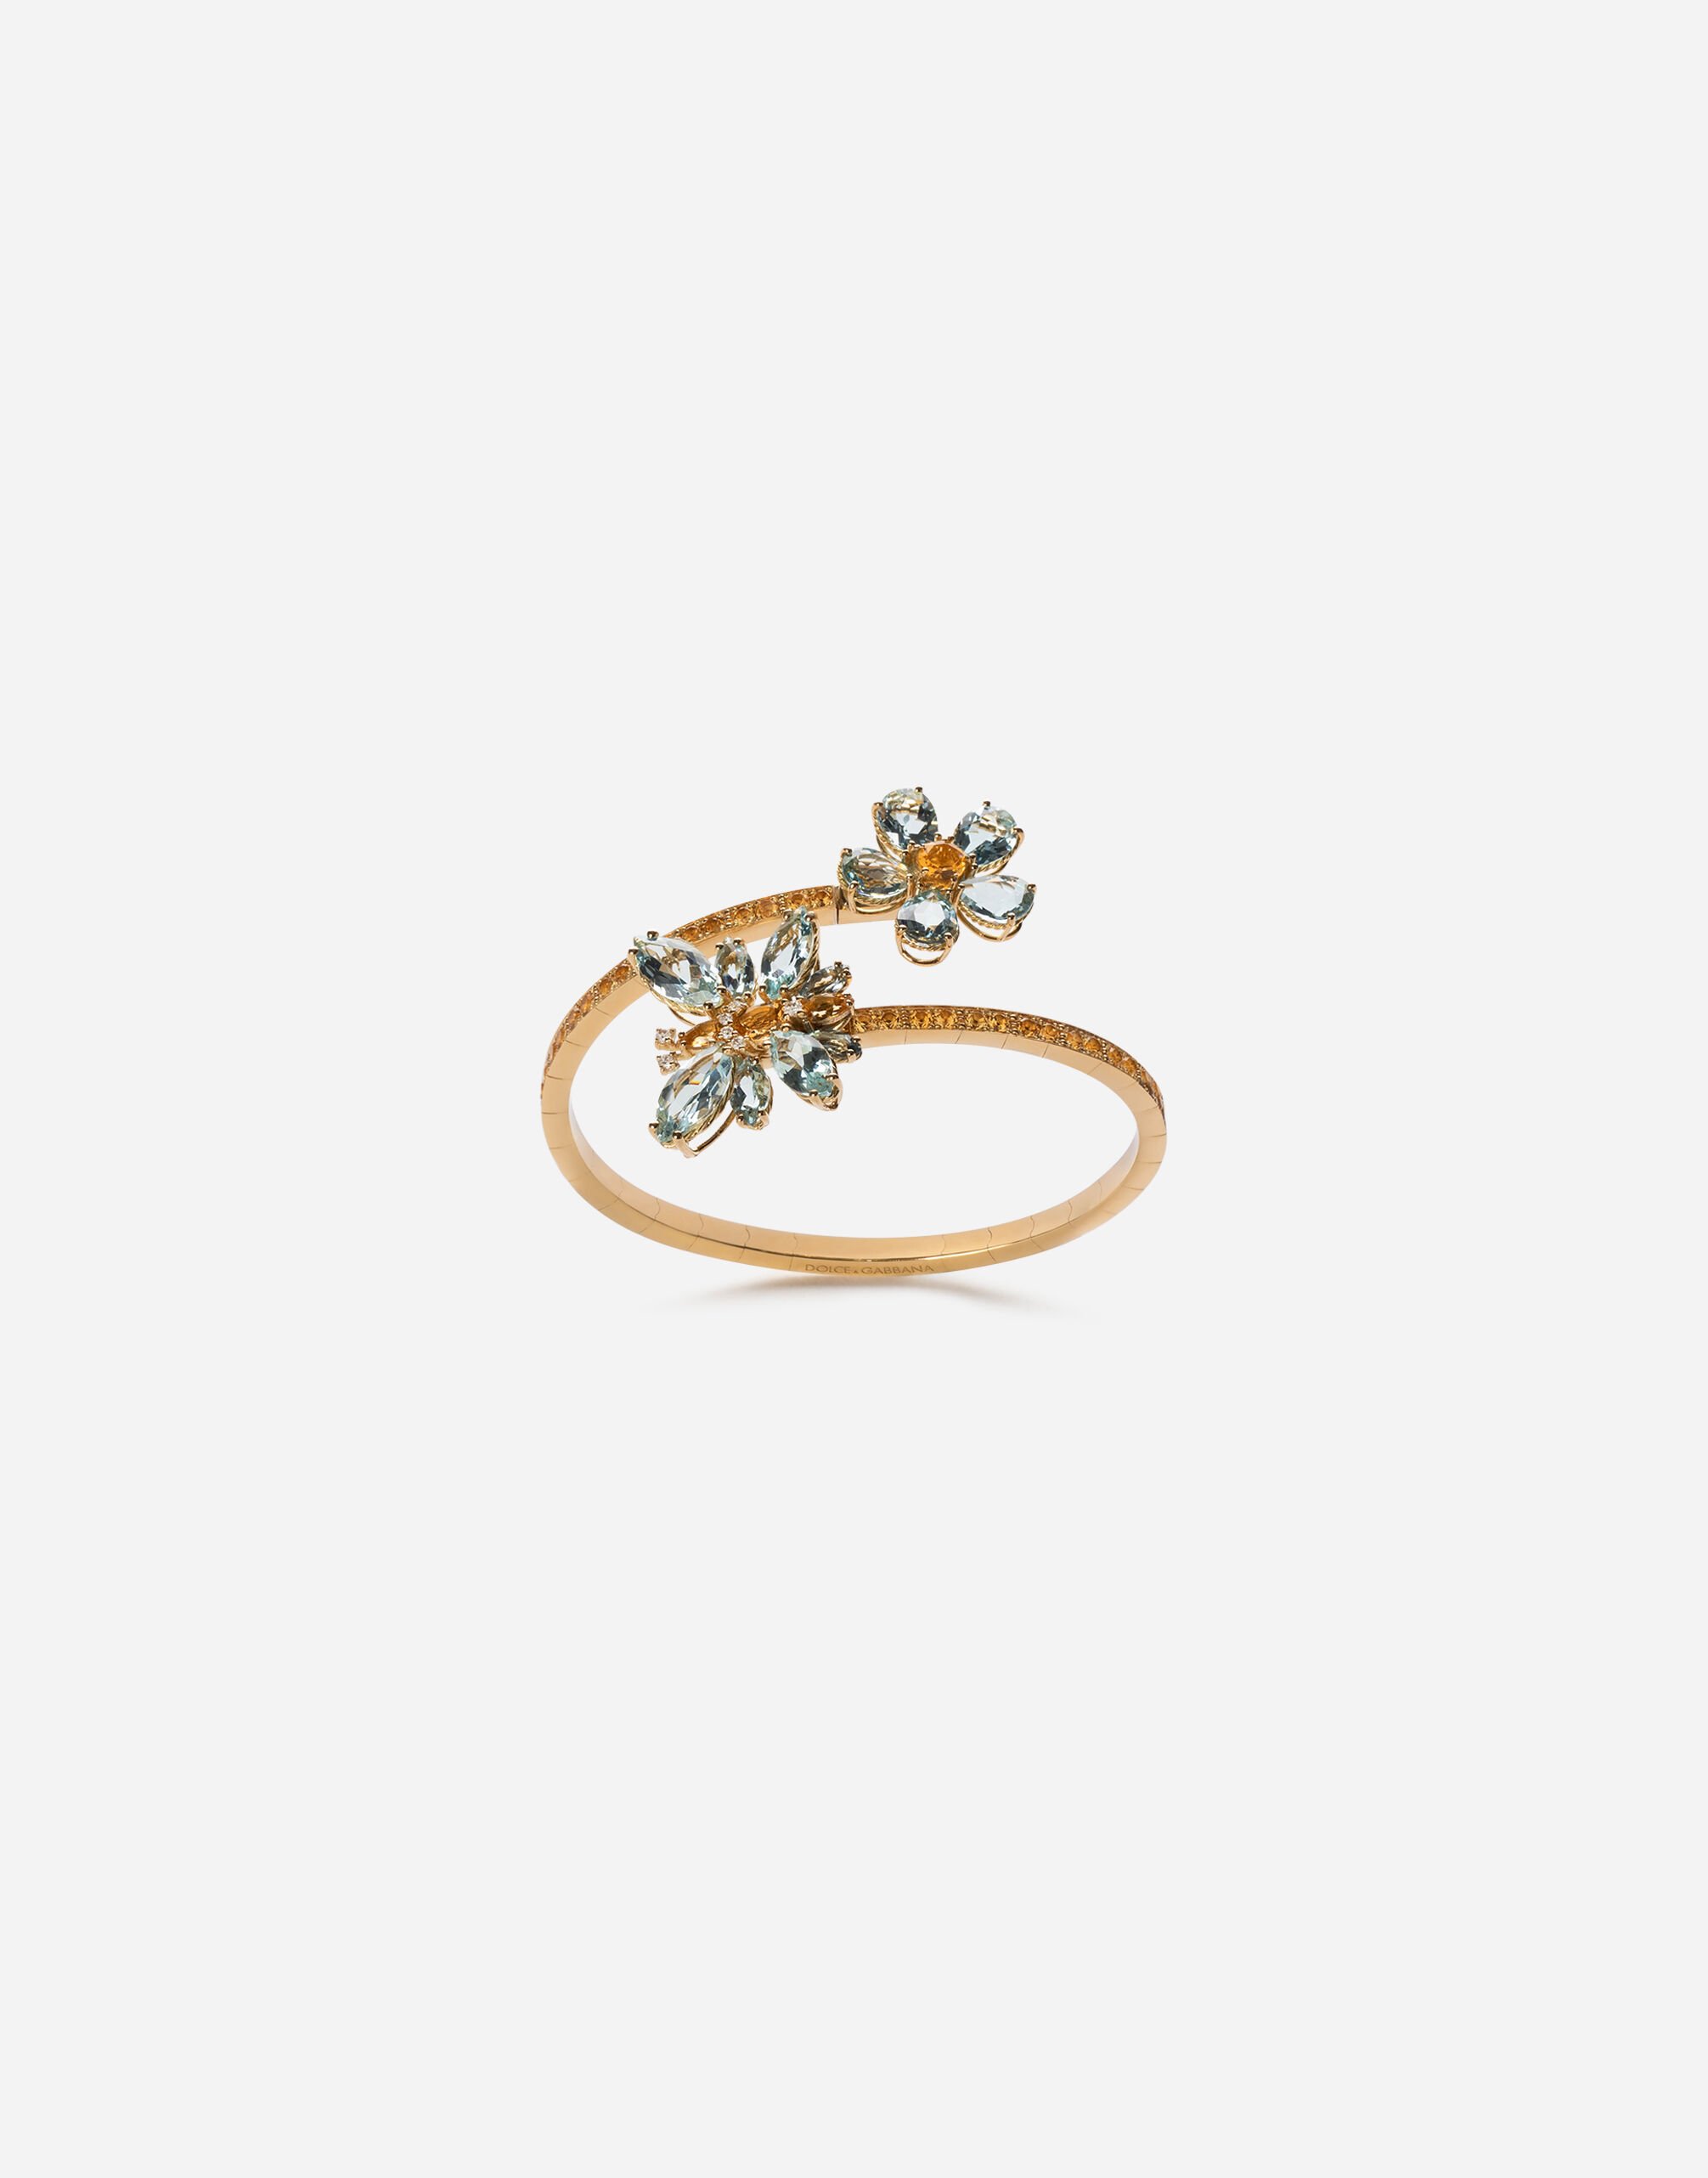 Dolce & Gabbana Spring yellow gold bracelet with butterfly-shaped settings and floral decoration Gold WBQA1GWQC01